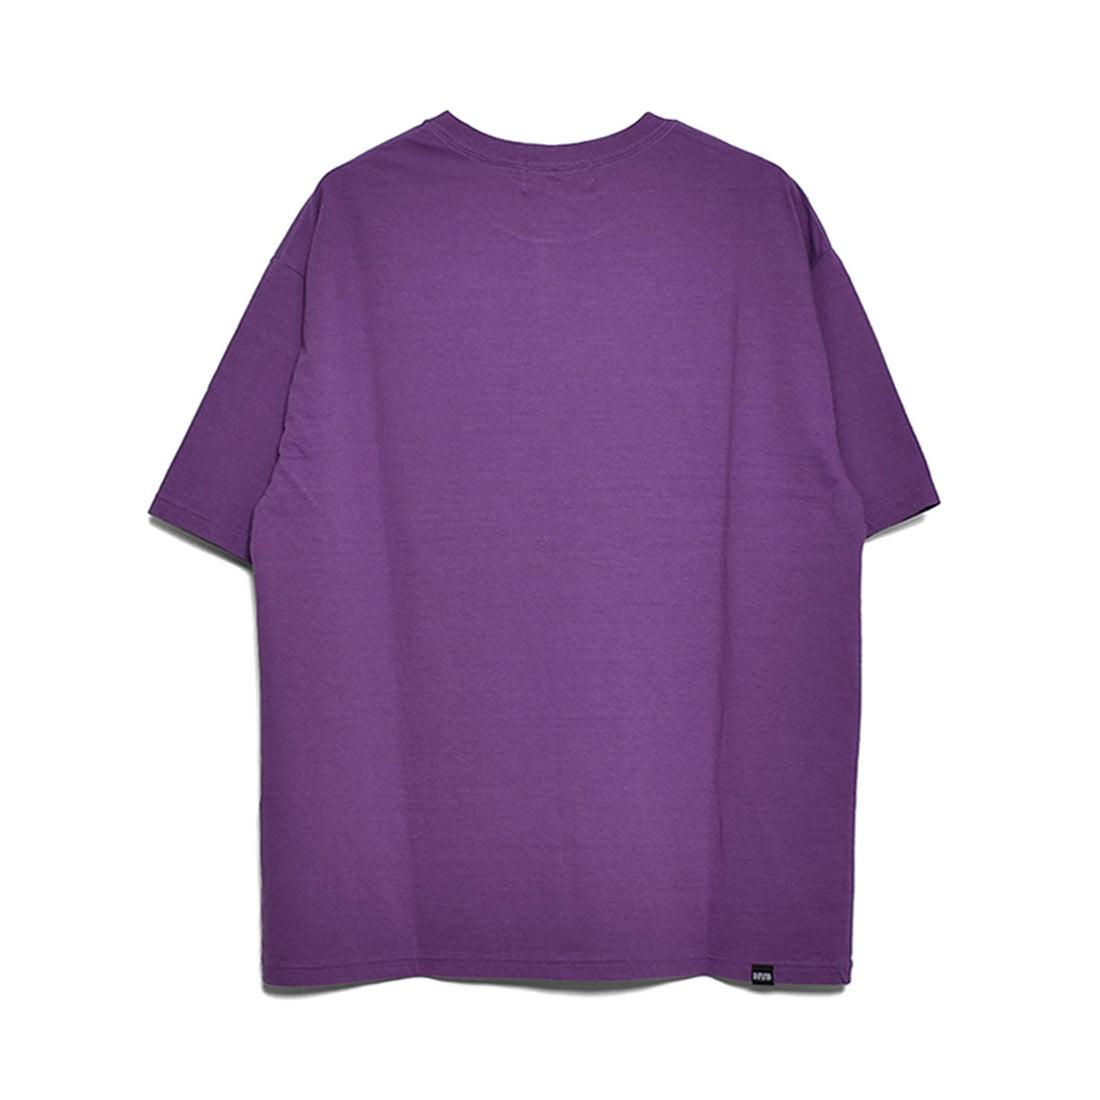 [HYSTERIC GLAMOUR]THINK HYS Tシャツ/PURPLE(02232CT05)